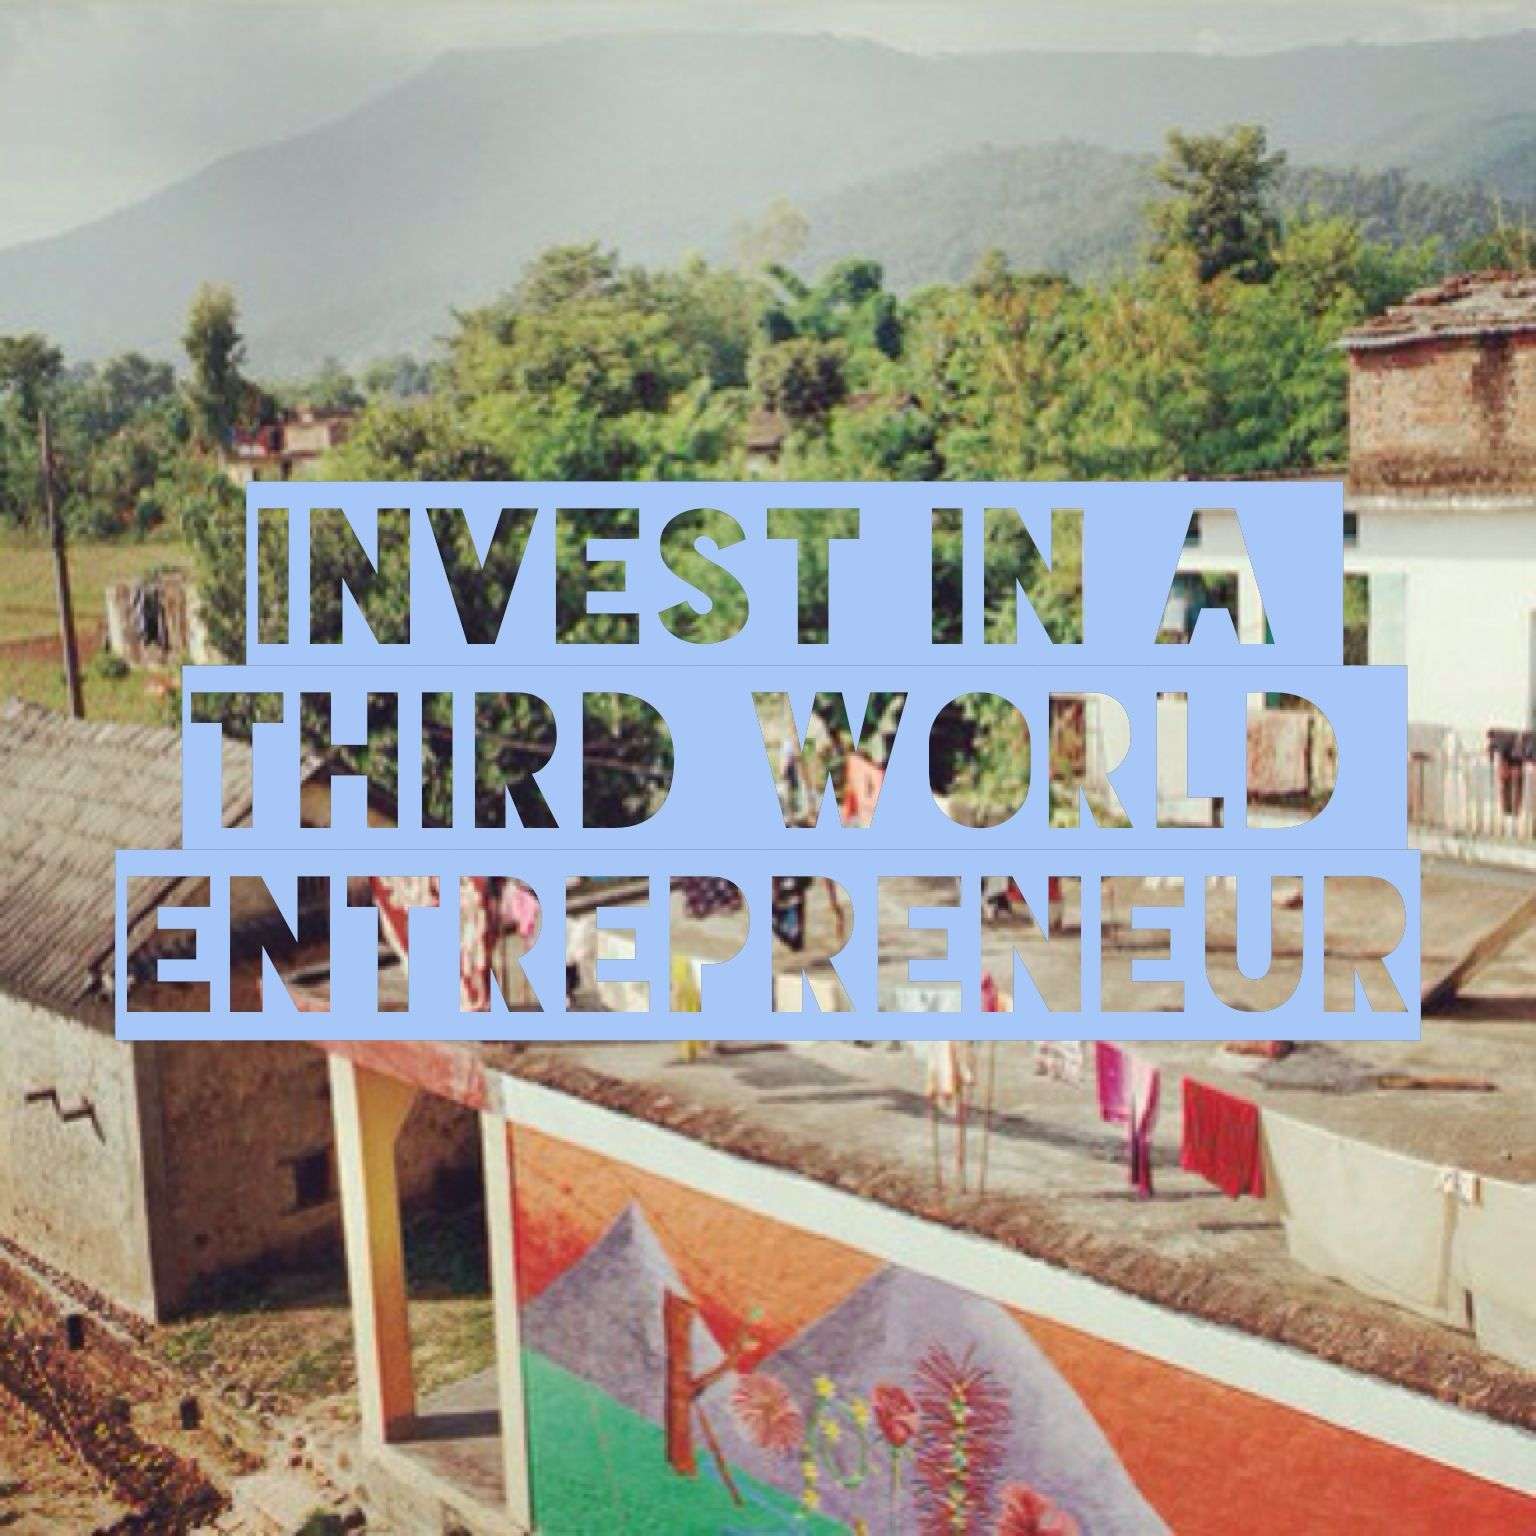 76. Invest in an entrepreneur from a third world country